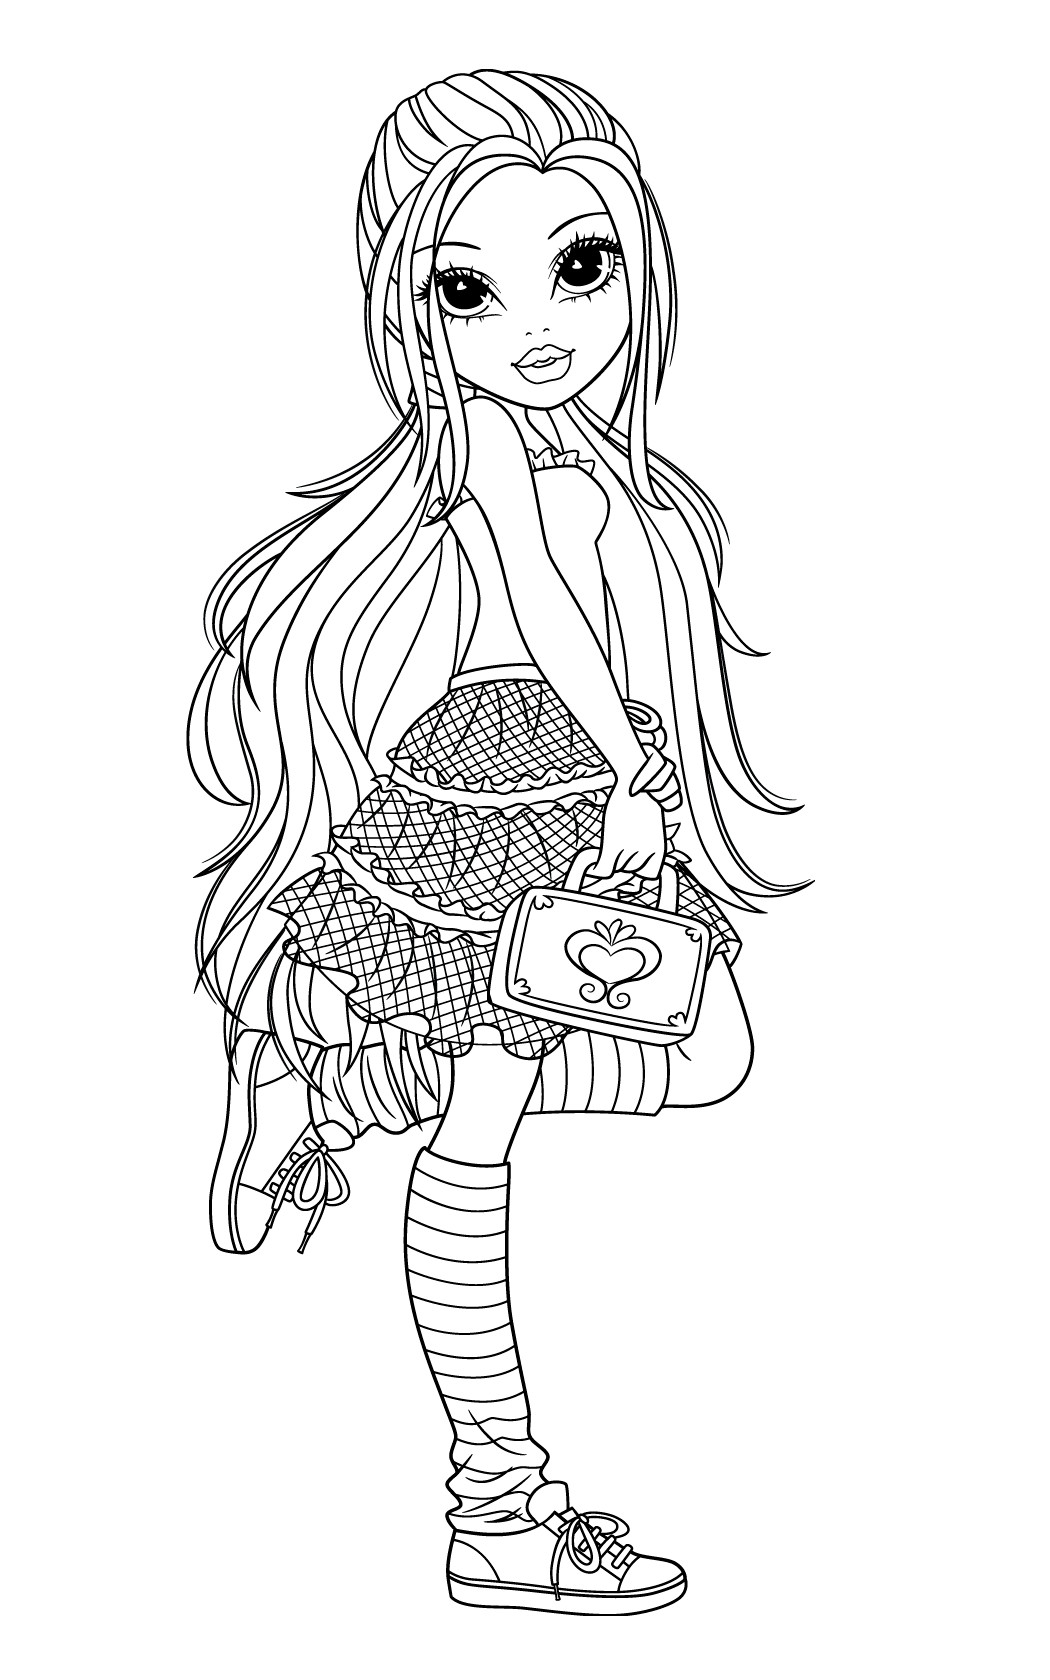 Coloring Pages For Adult Girls
 moxie girlz coloring pages